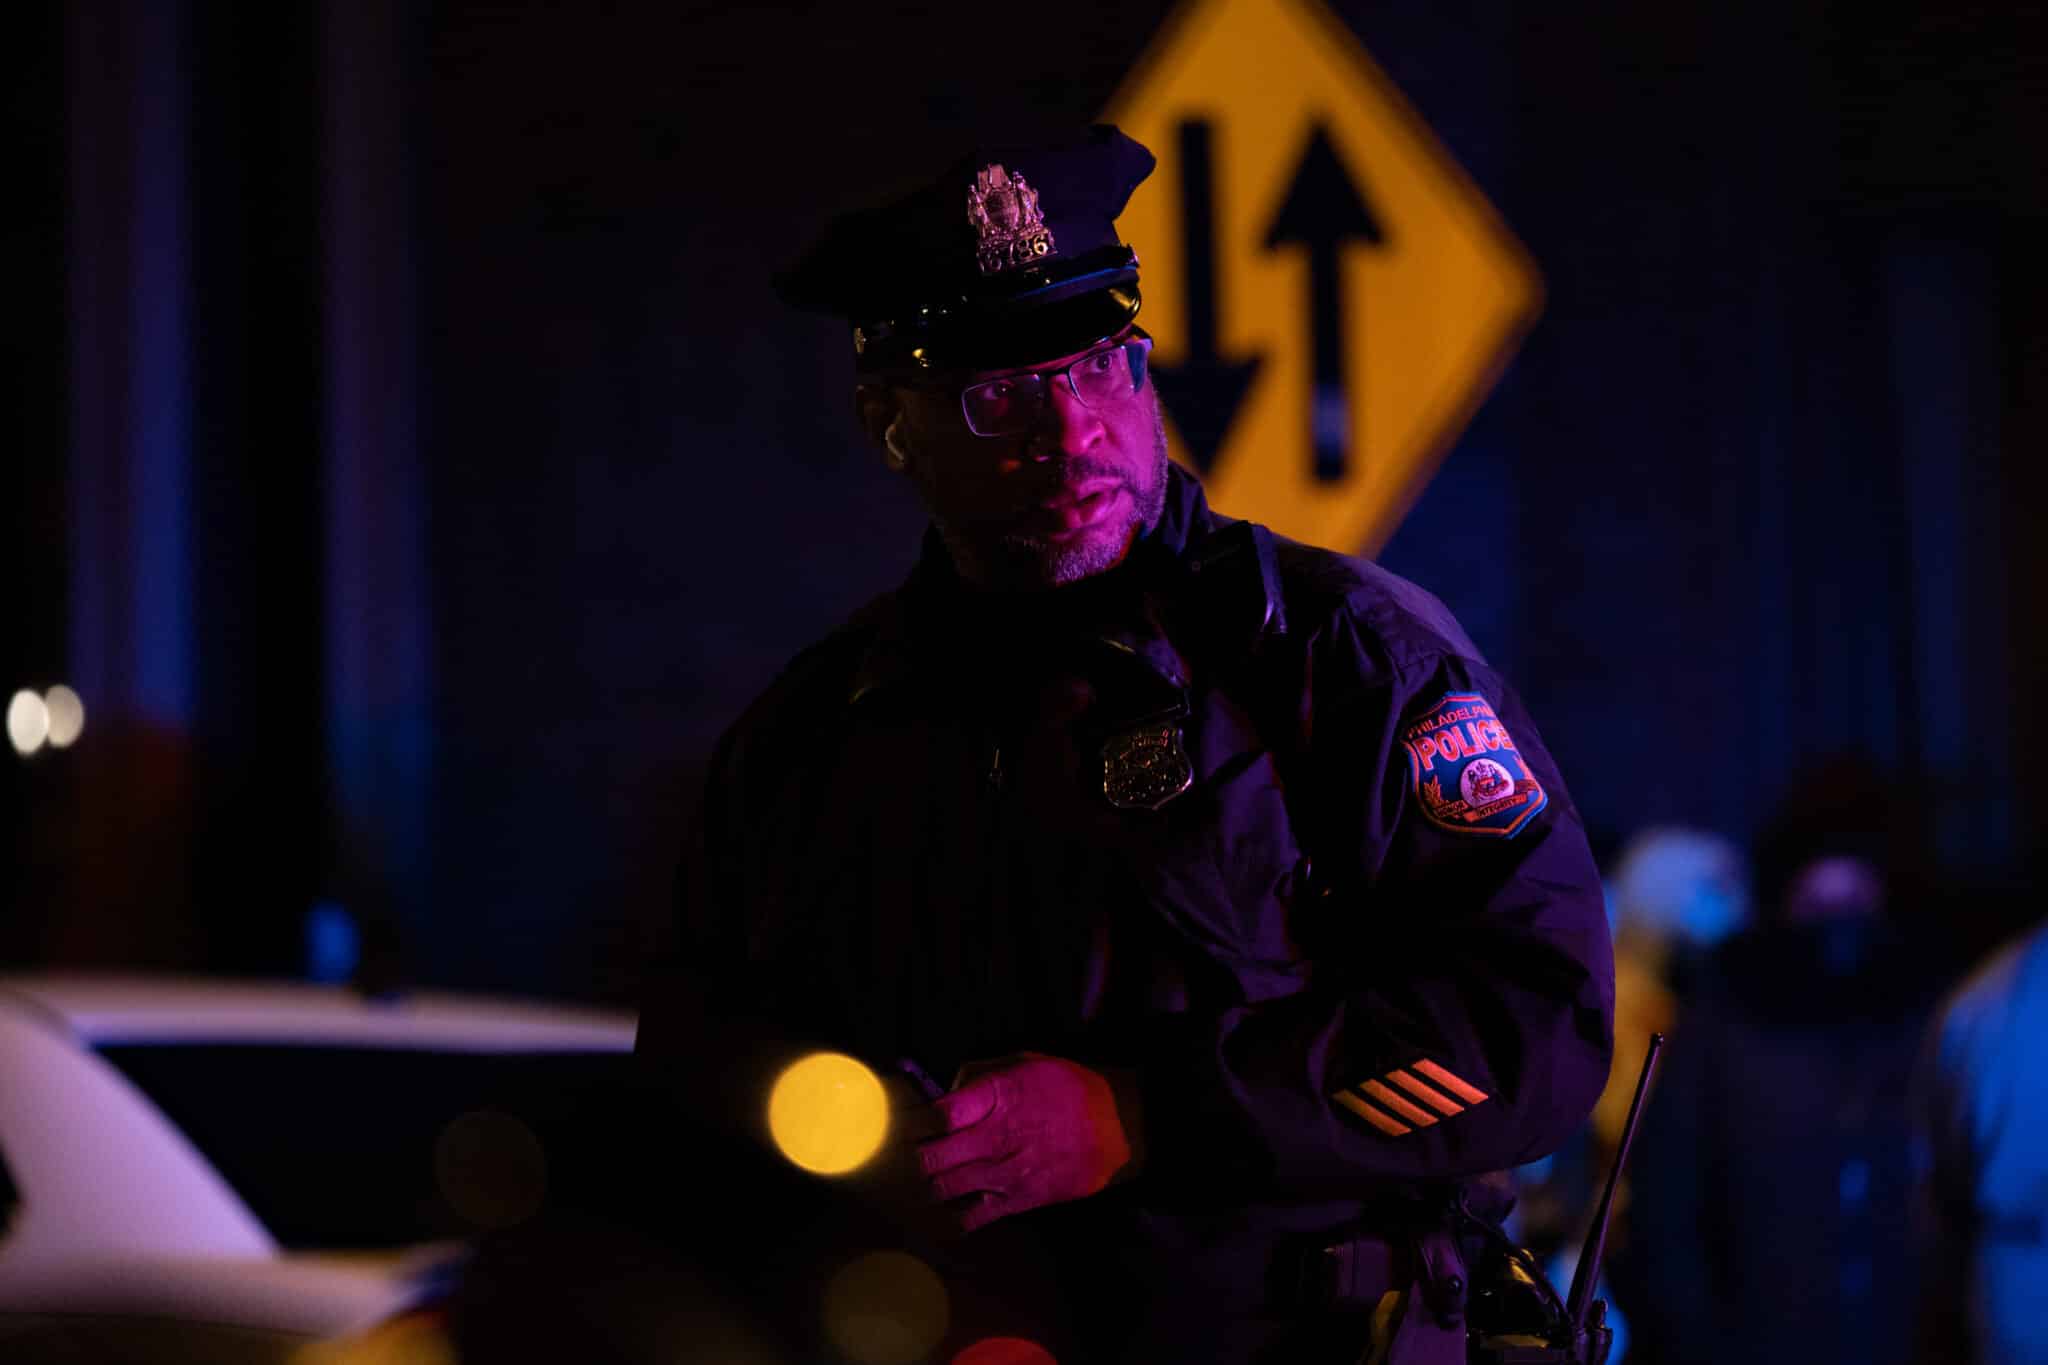 PHILADELPHIA, PA - JANUARY 05: A police officer keeps watch near the scene of the fatal fire in the Fairmount neighborhood on January 5, 2022 in Philadelphia, Pennsylvania. A fire killed 13 people, including seven children, in a Philadelphia rowhouse on Wednesday morning, officials said. (Photo by Hannah Beier/Getty Images)